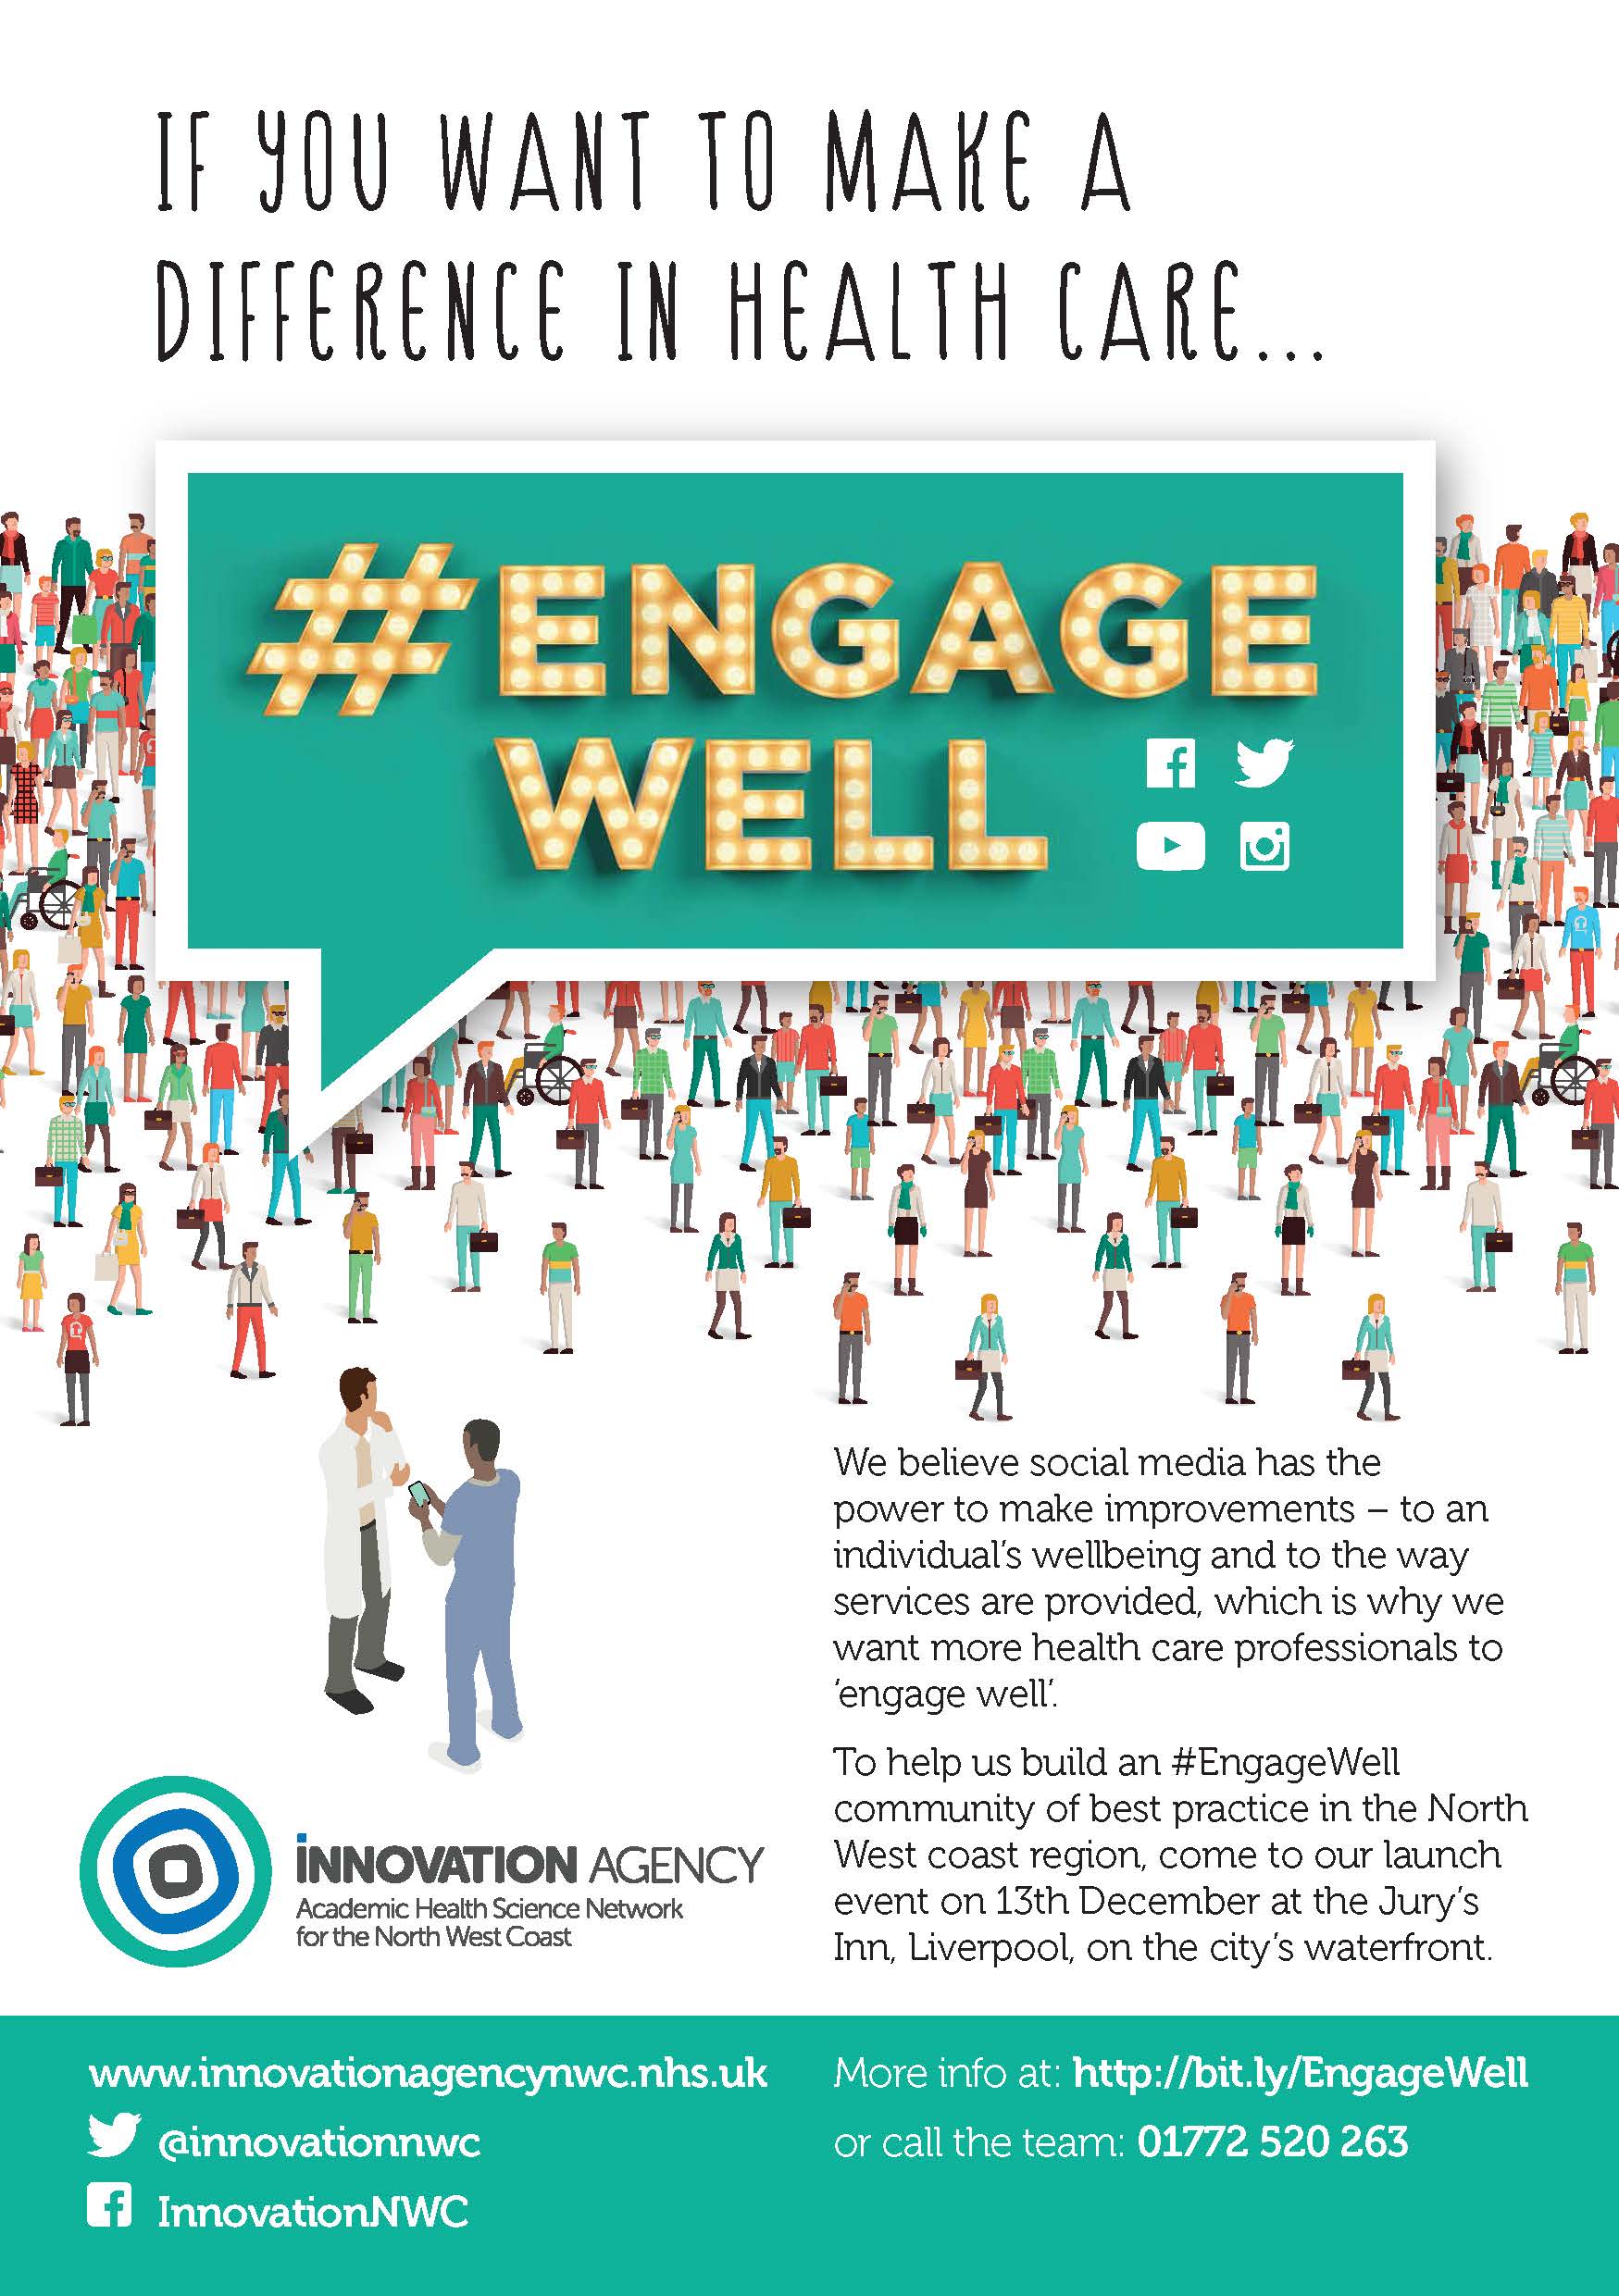 Championing social media to improve health care featured image